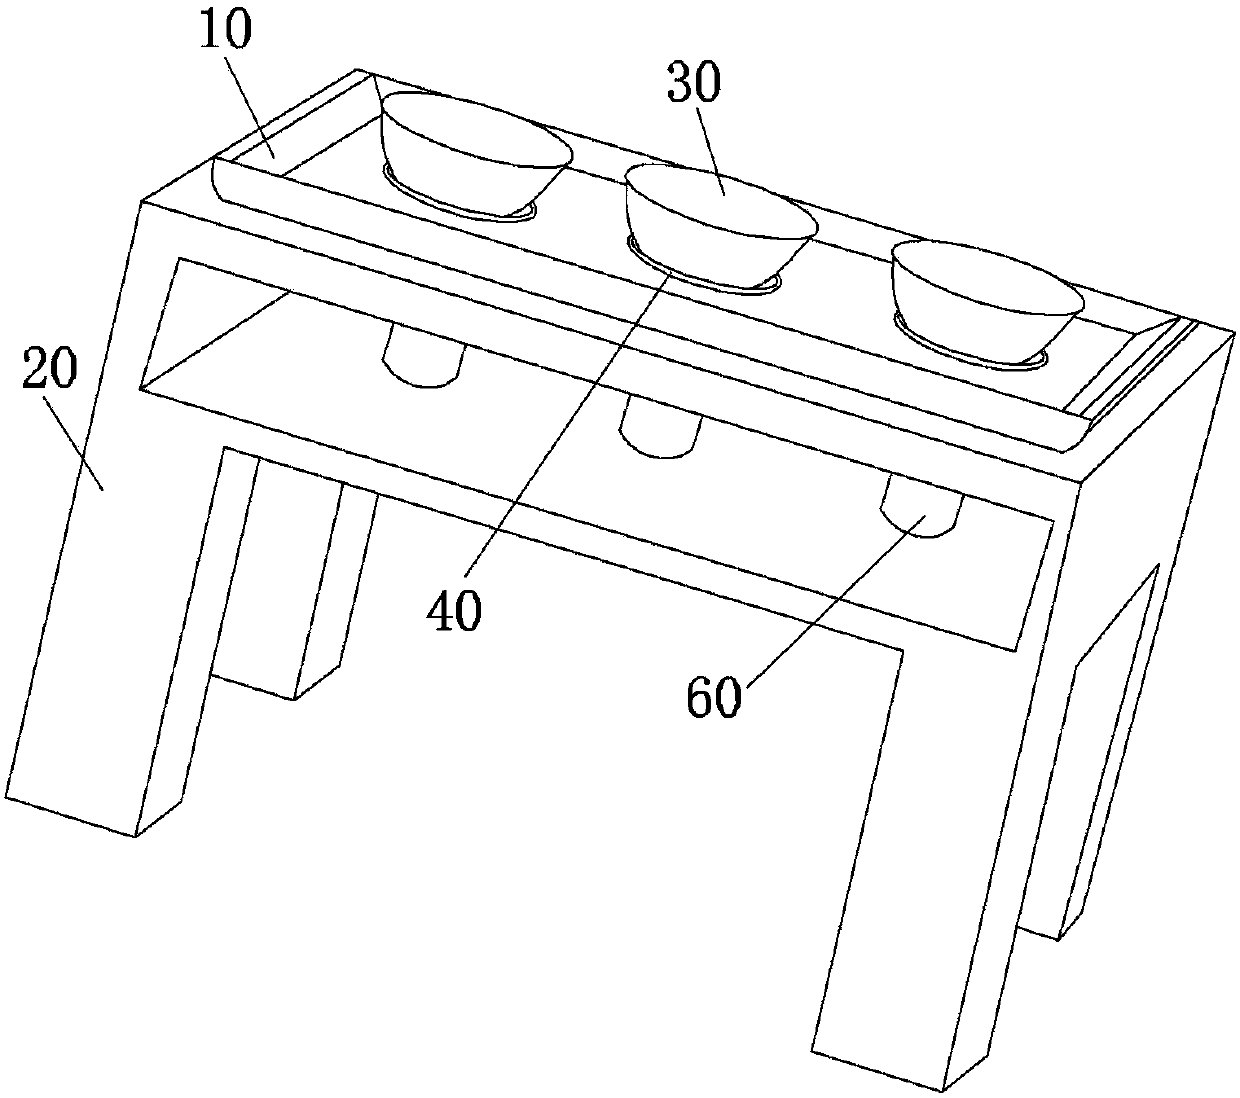 Meal plate capable of achieving automatic settlement